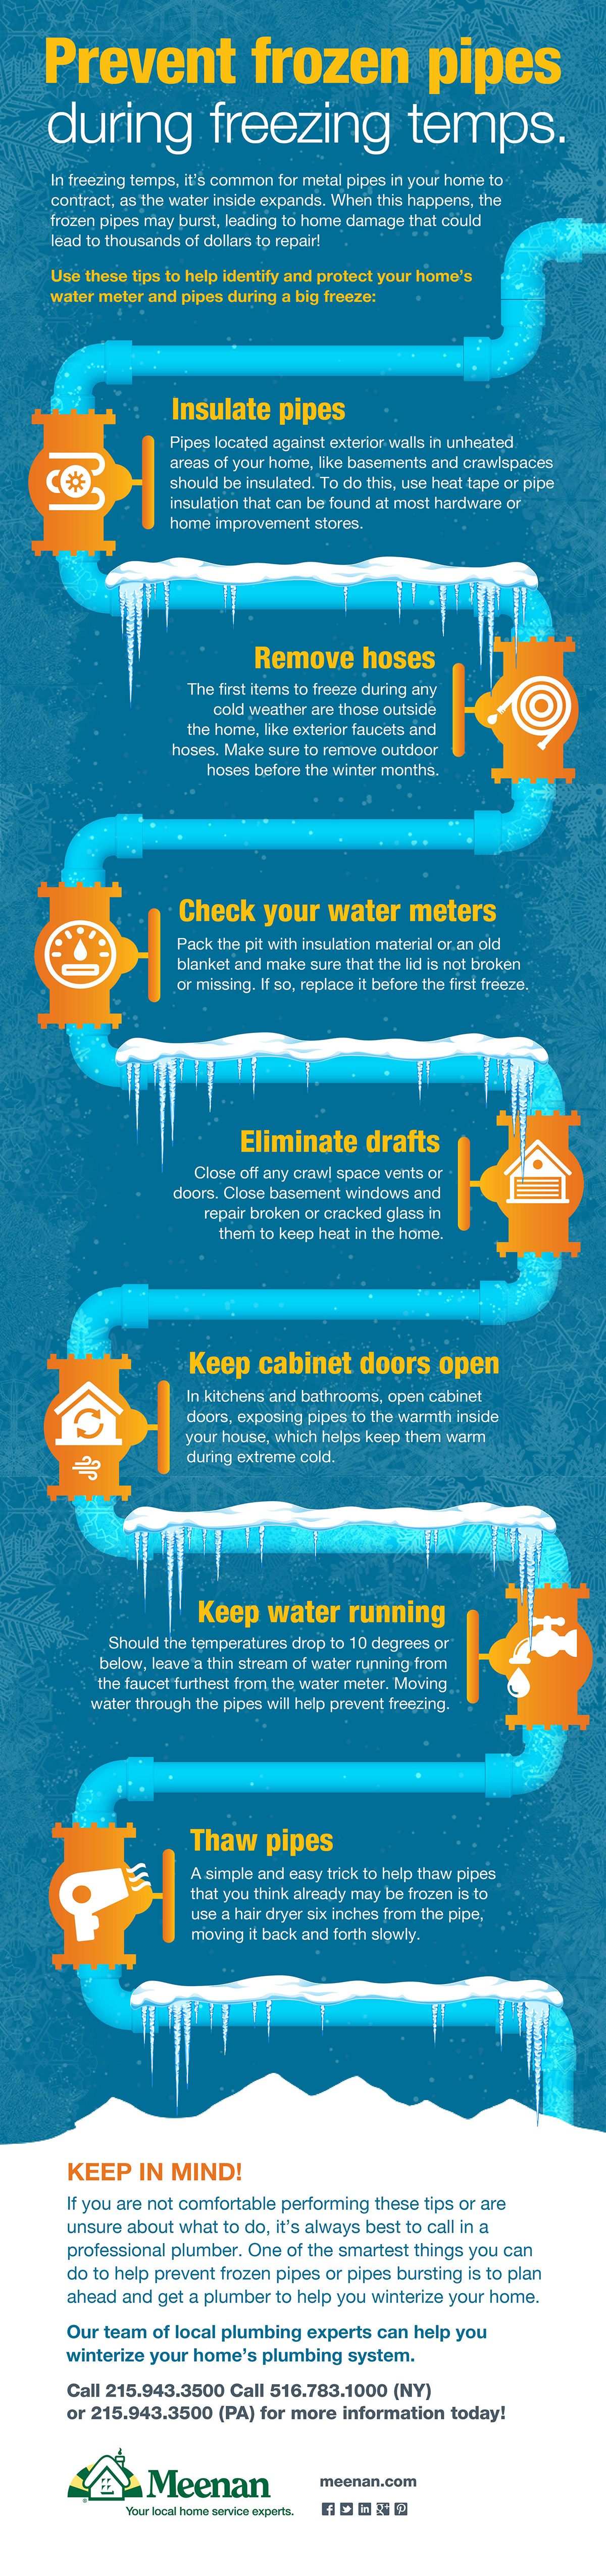 How to prevent frozen pipes during freezing temps